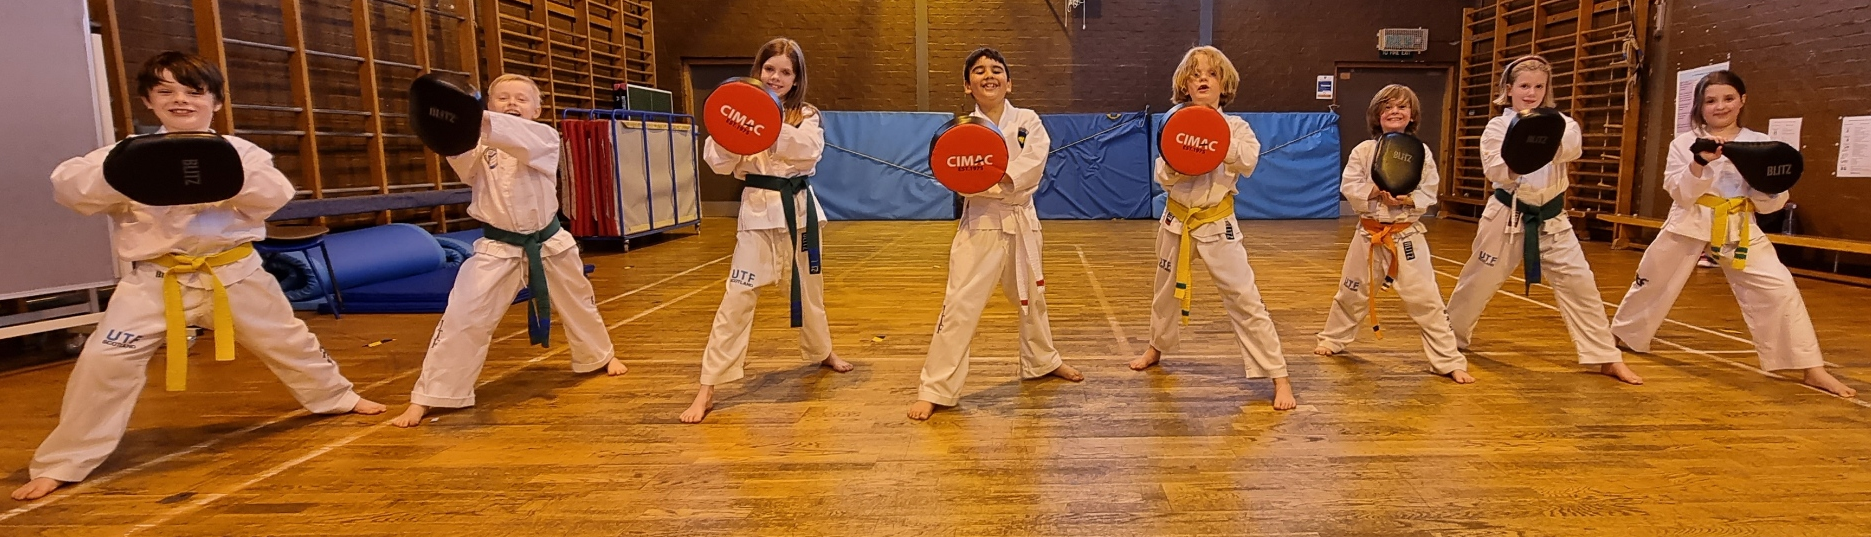 Inverkeithing Class Showing New Pads